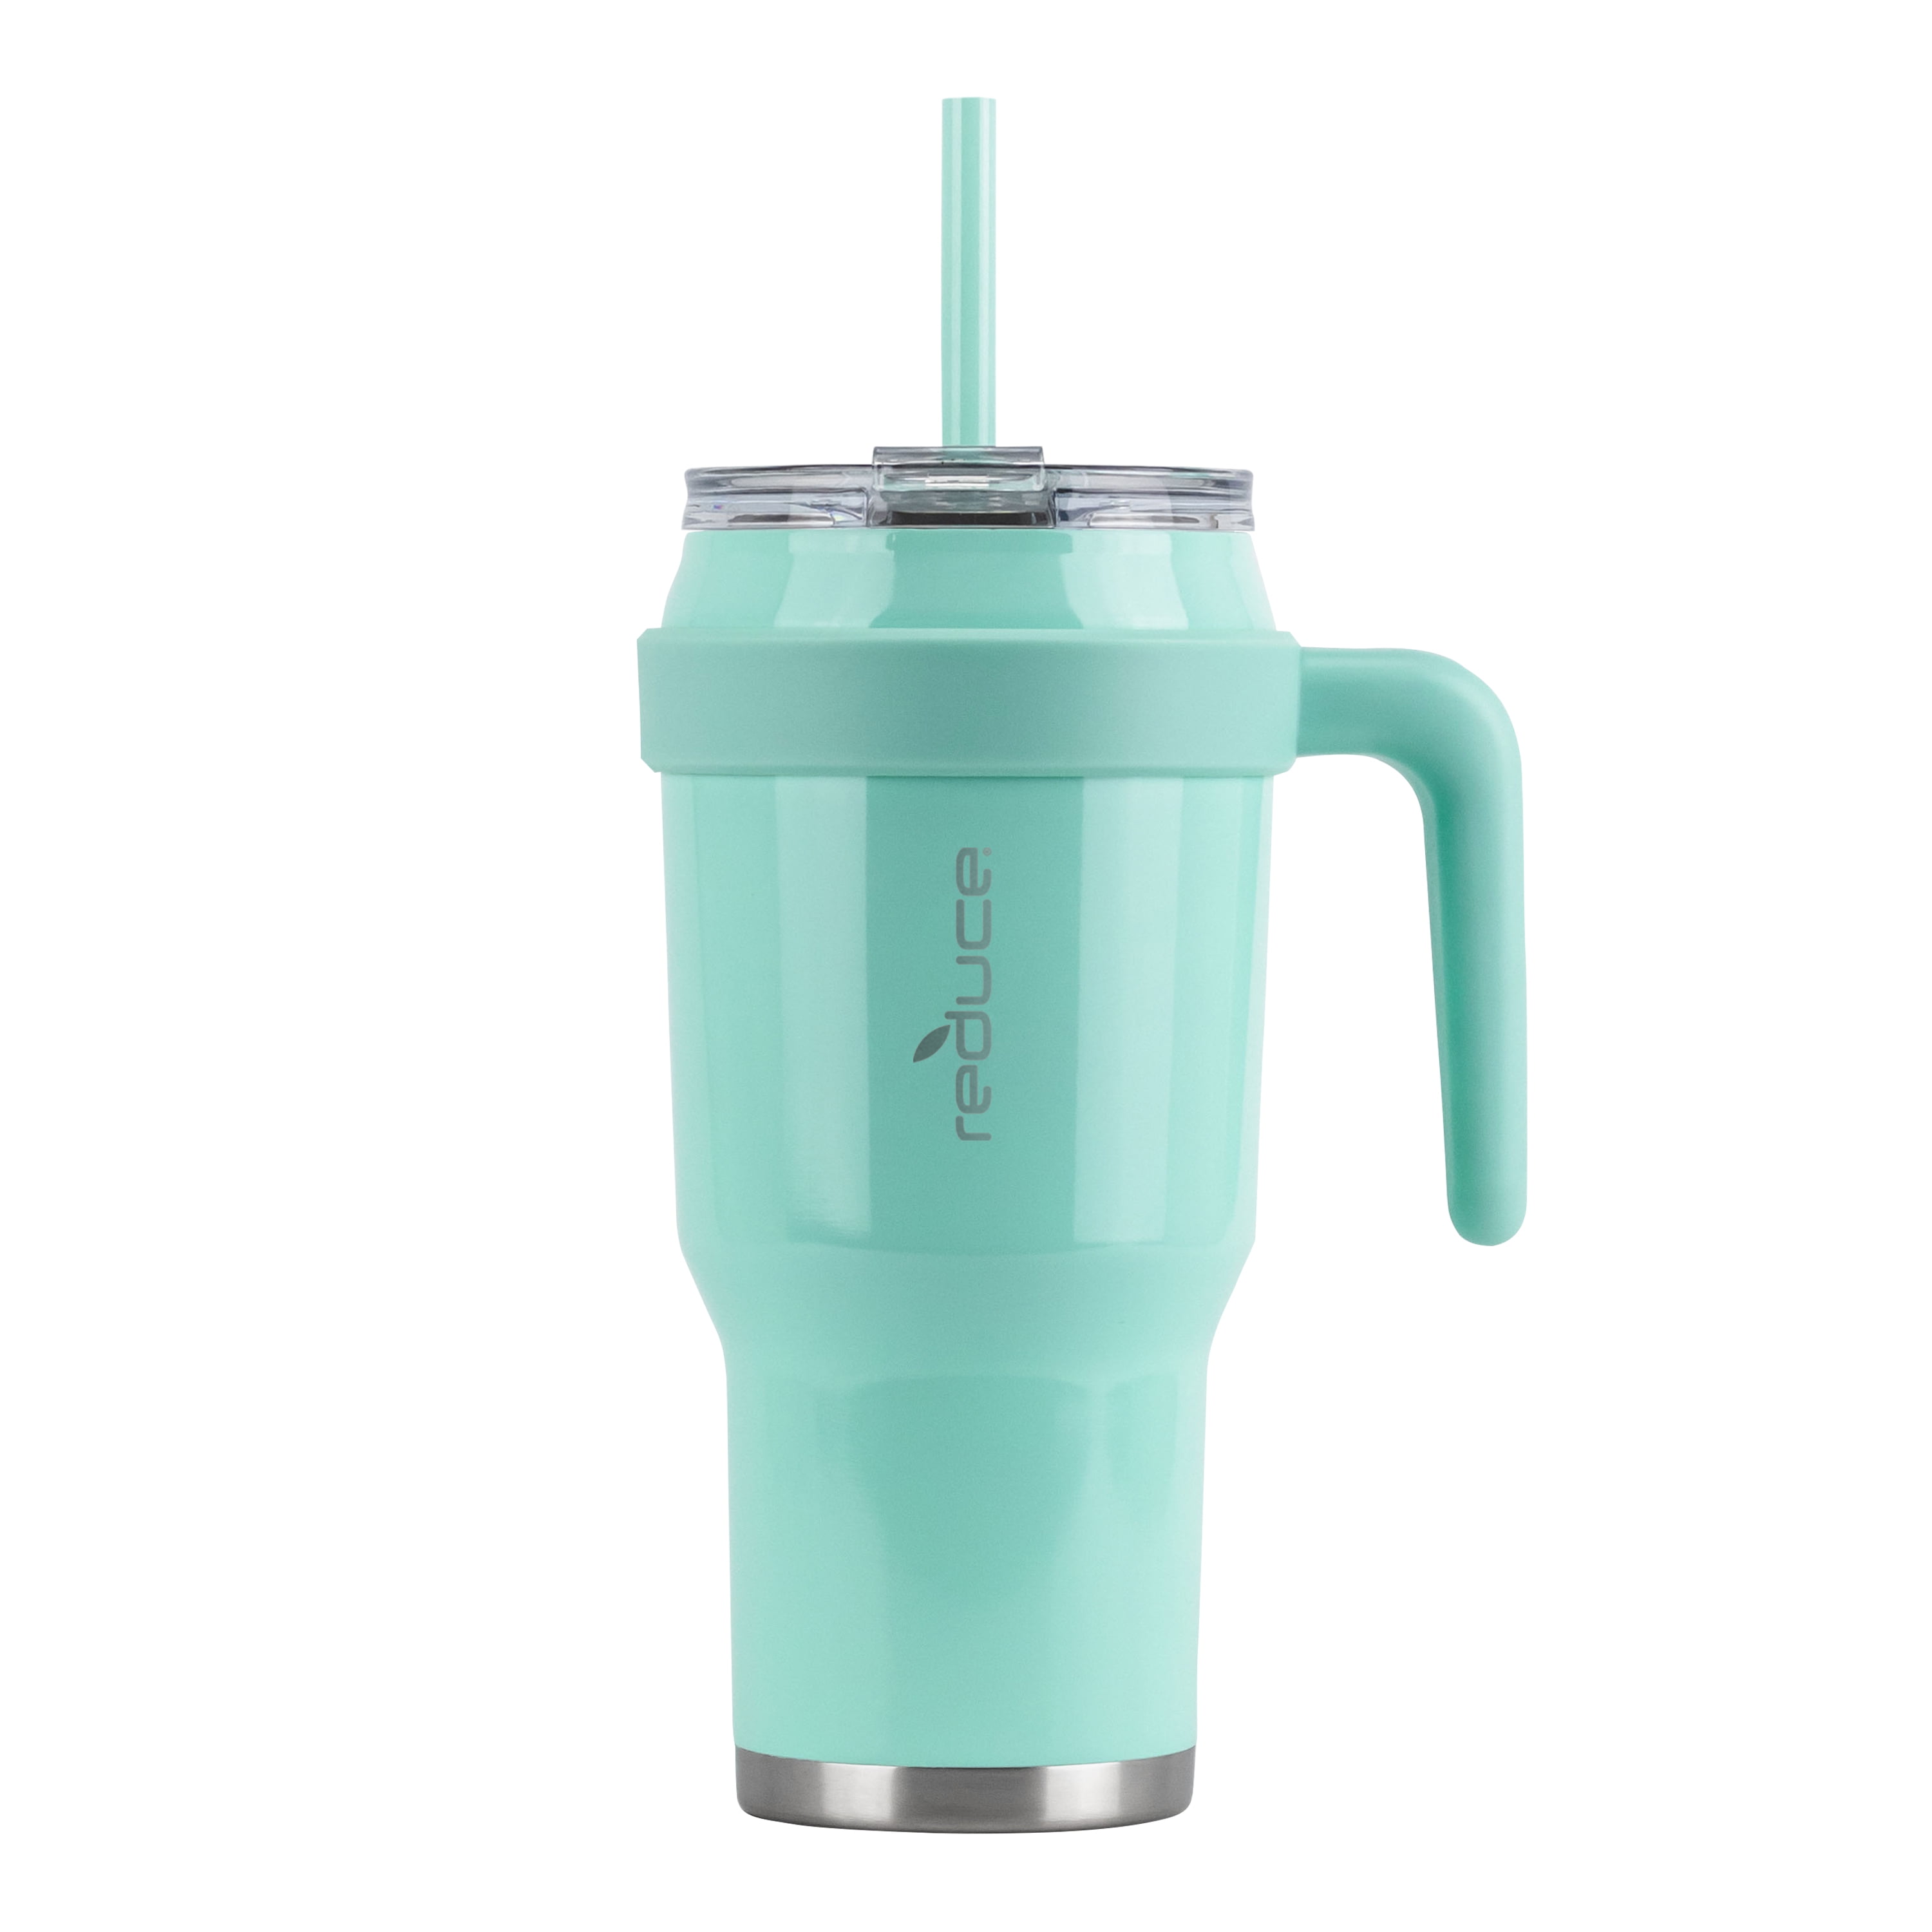 Reduce Vacuum Insulated Stainless Steel Cold1 Mug With Lid And Straw Mild Mint 40 Fl Oz